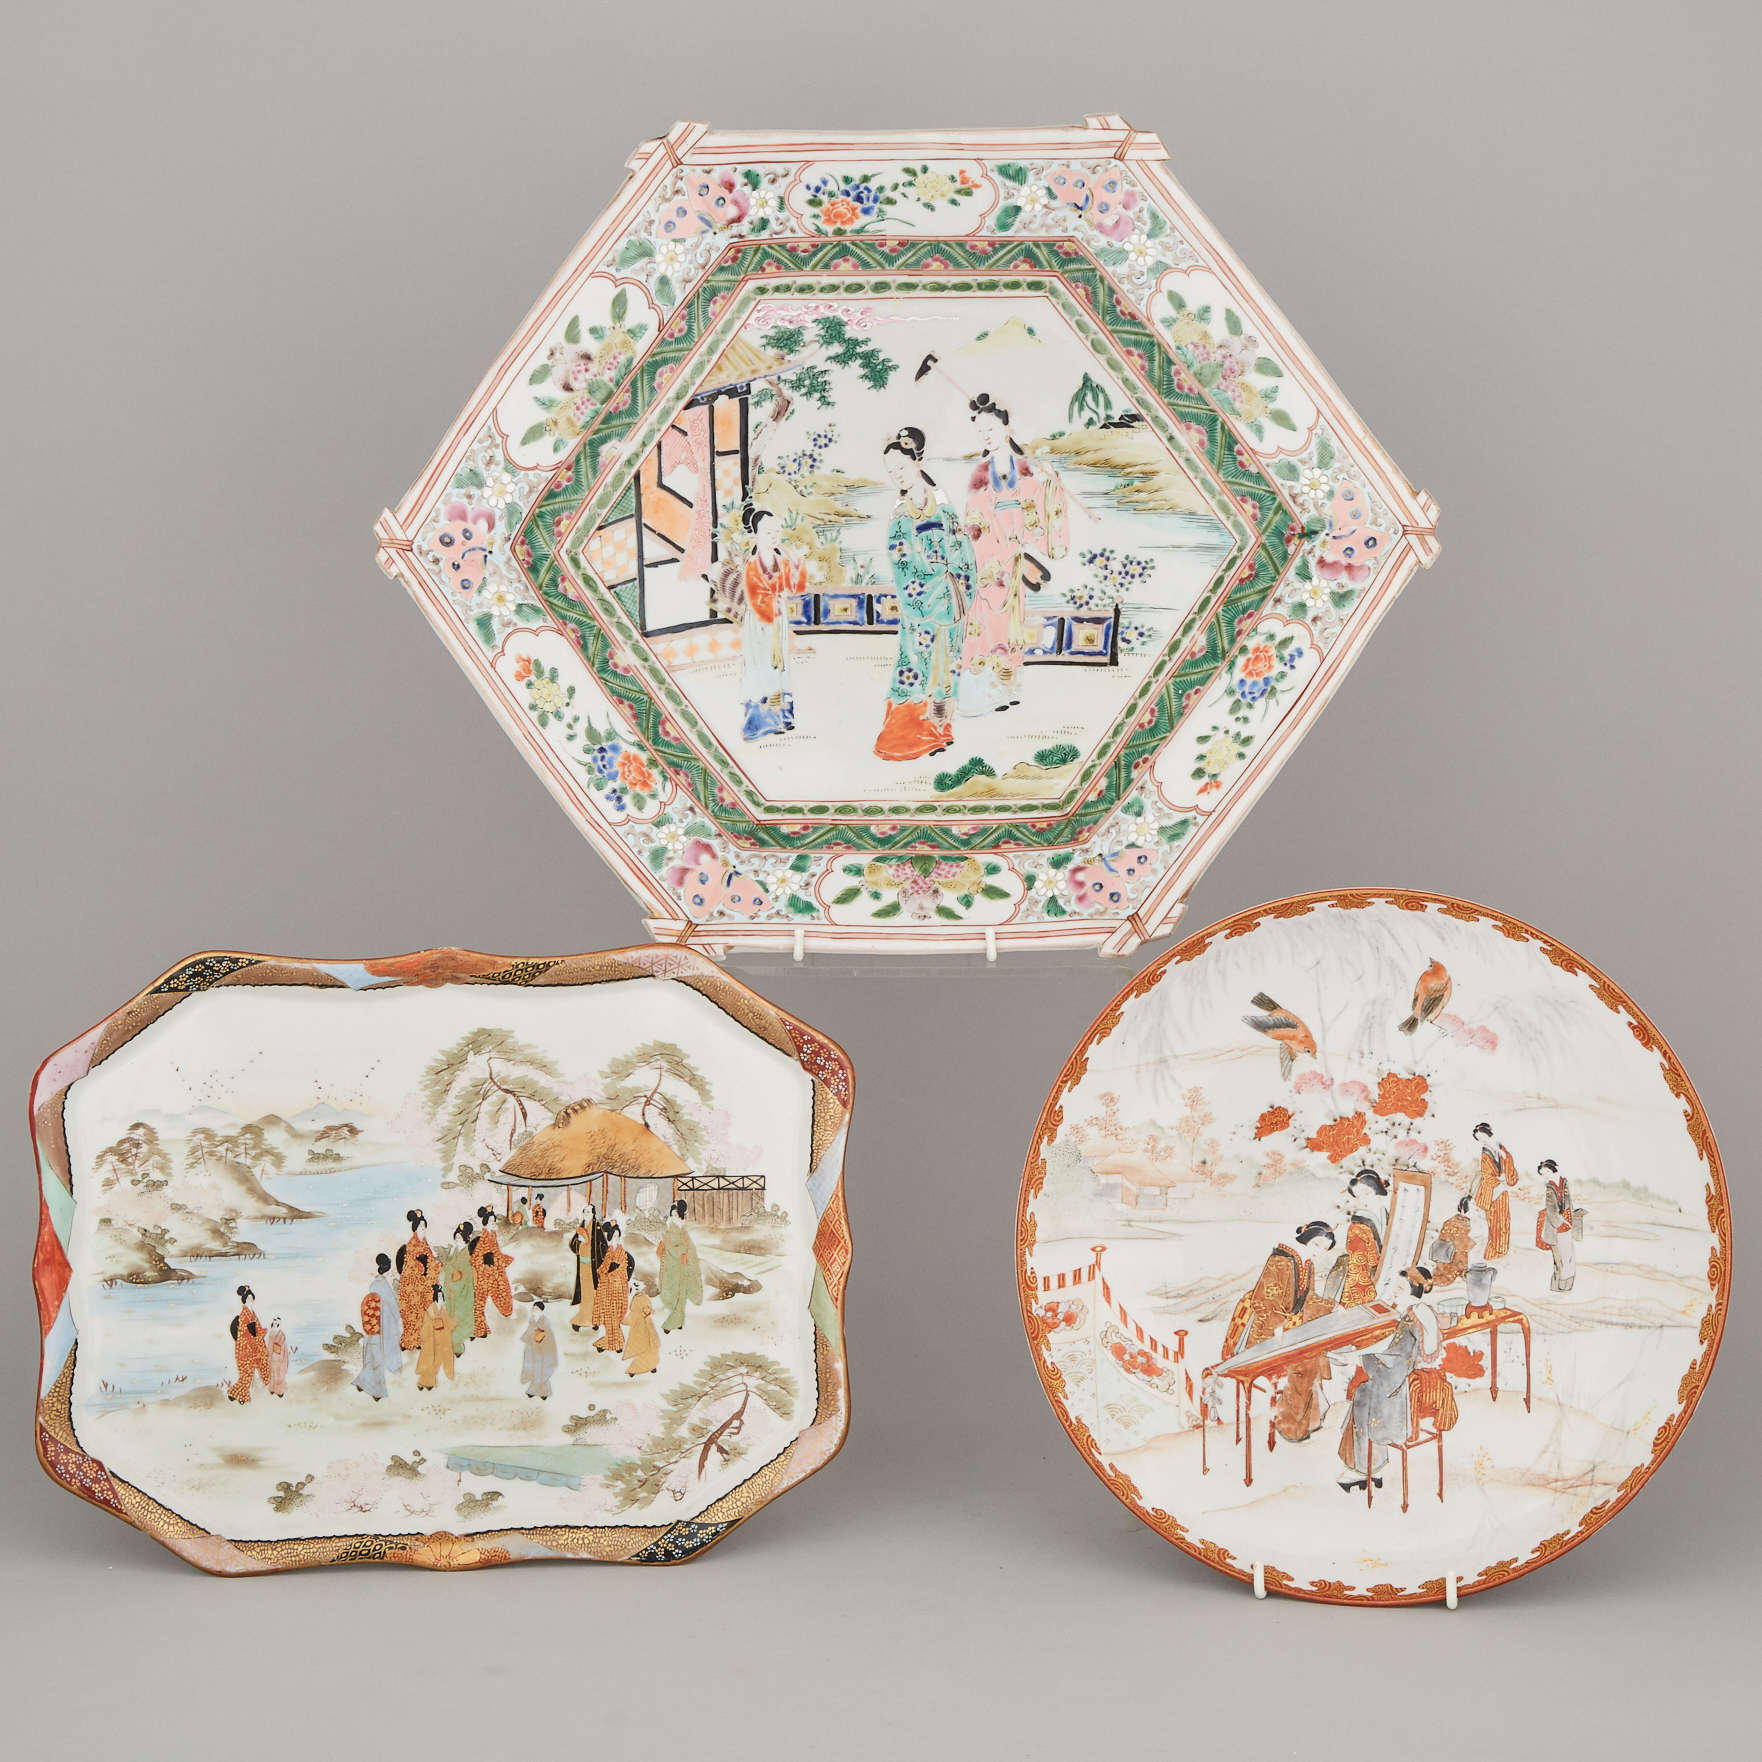 A Group of Three Japanese Kutani and Enameled Porcelain Dishes, Early 20th Century